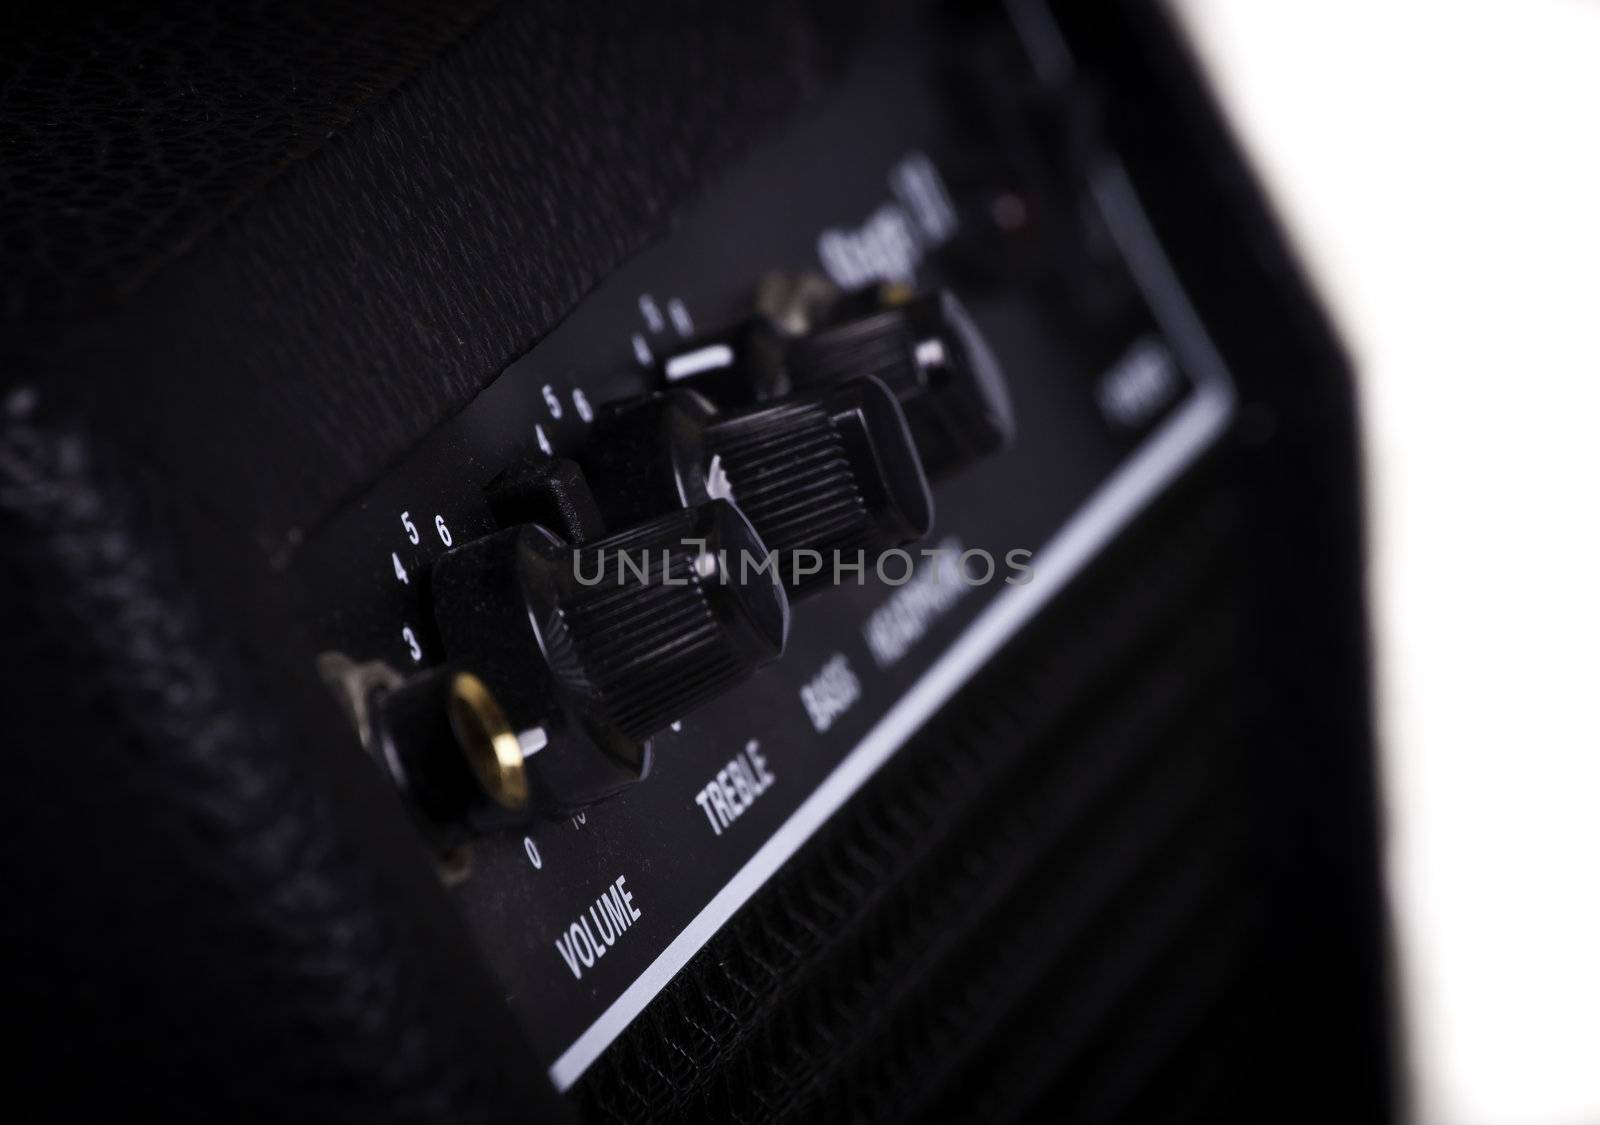 Knobs of different functions on a guitar amp